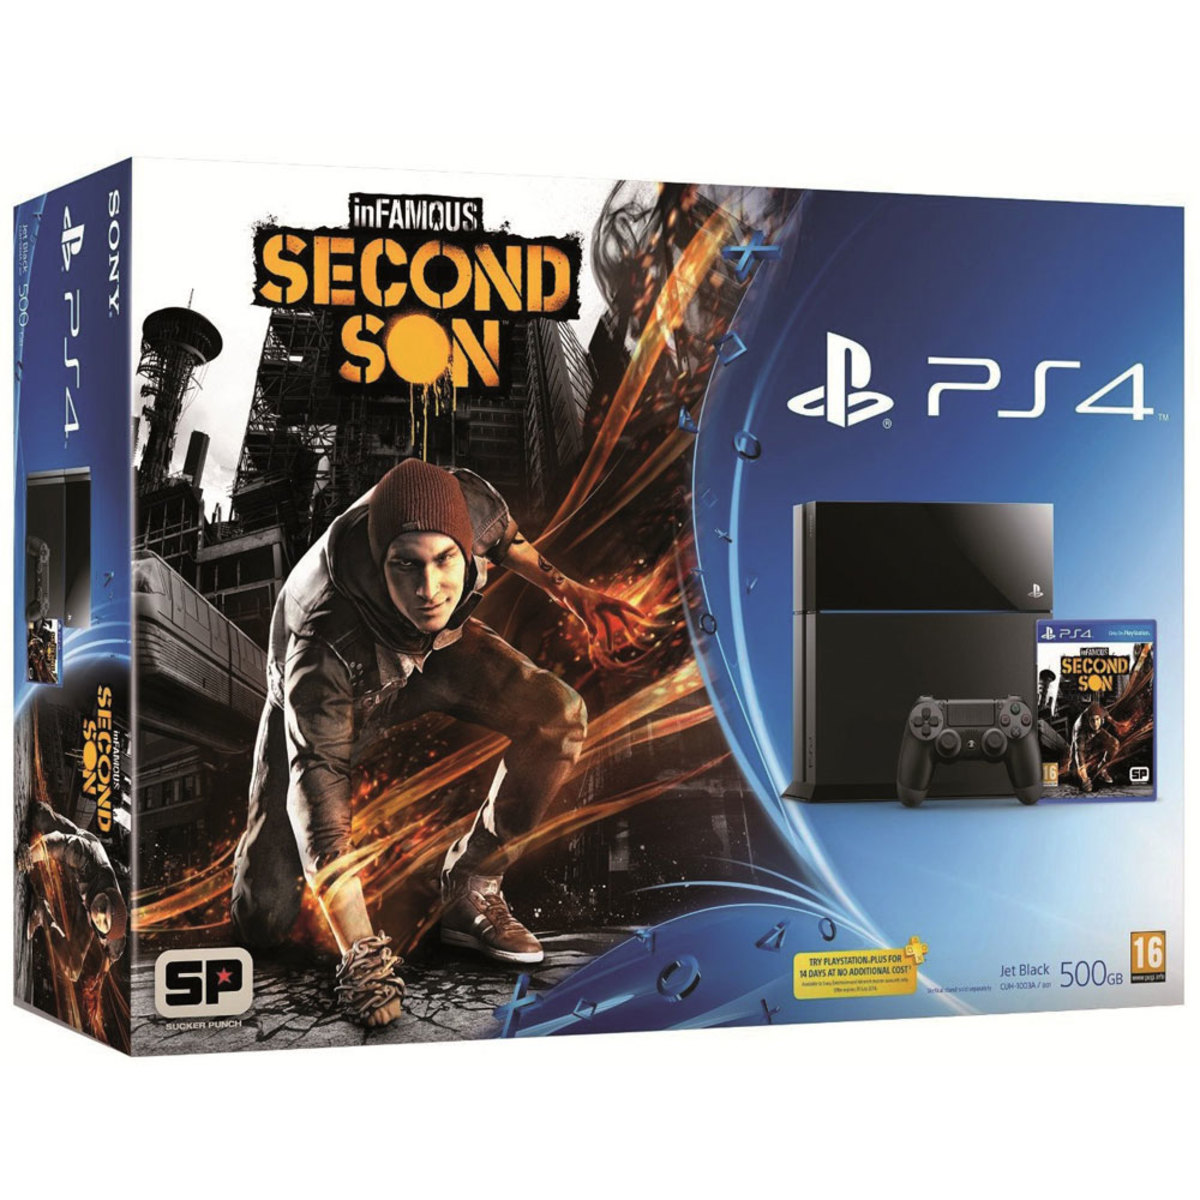 Sony PS4 500GB + Infamous Second Son